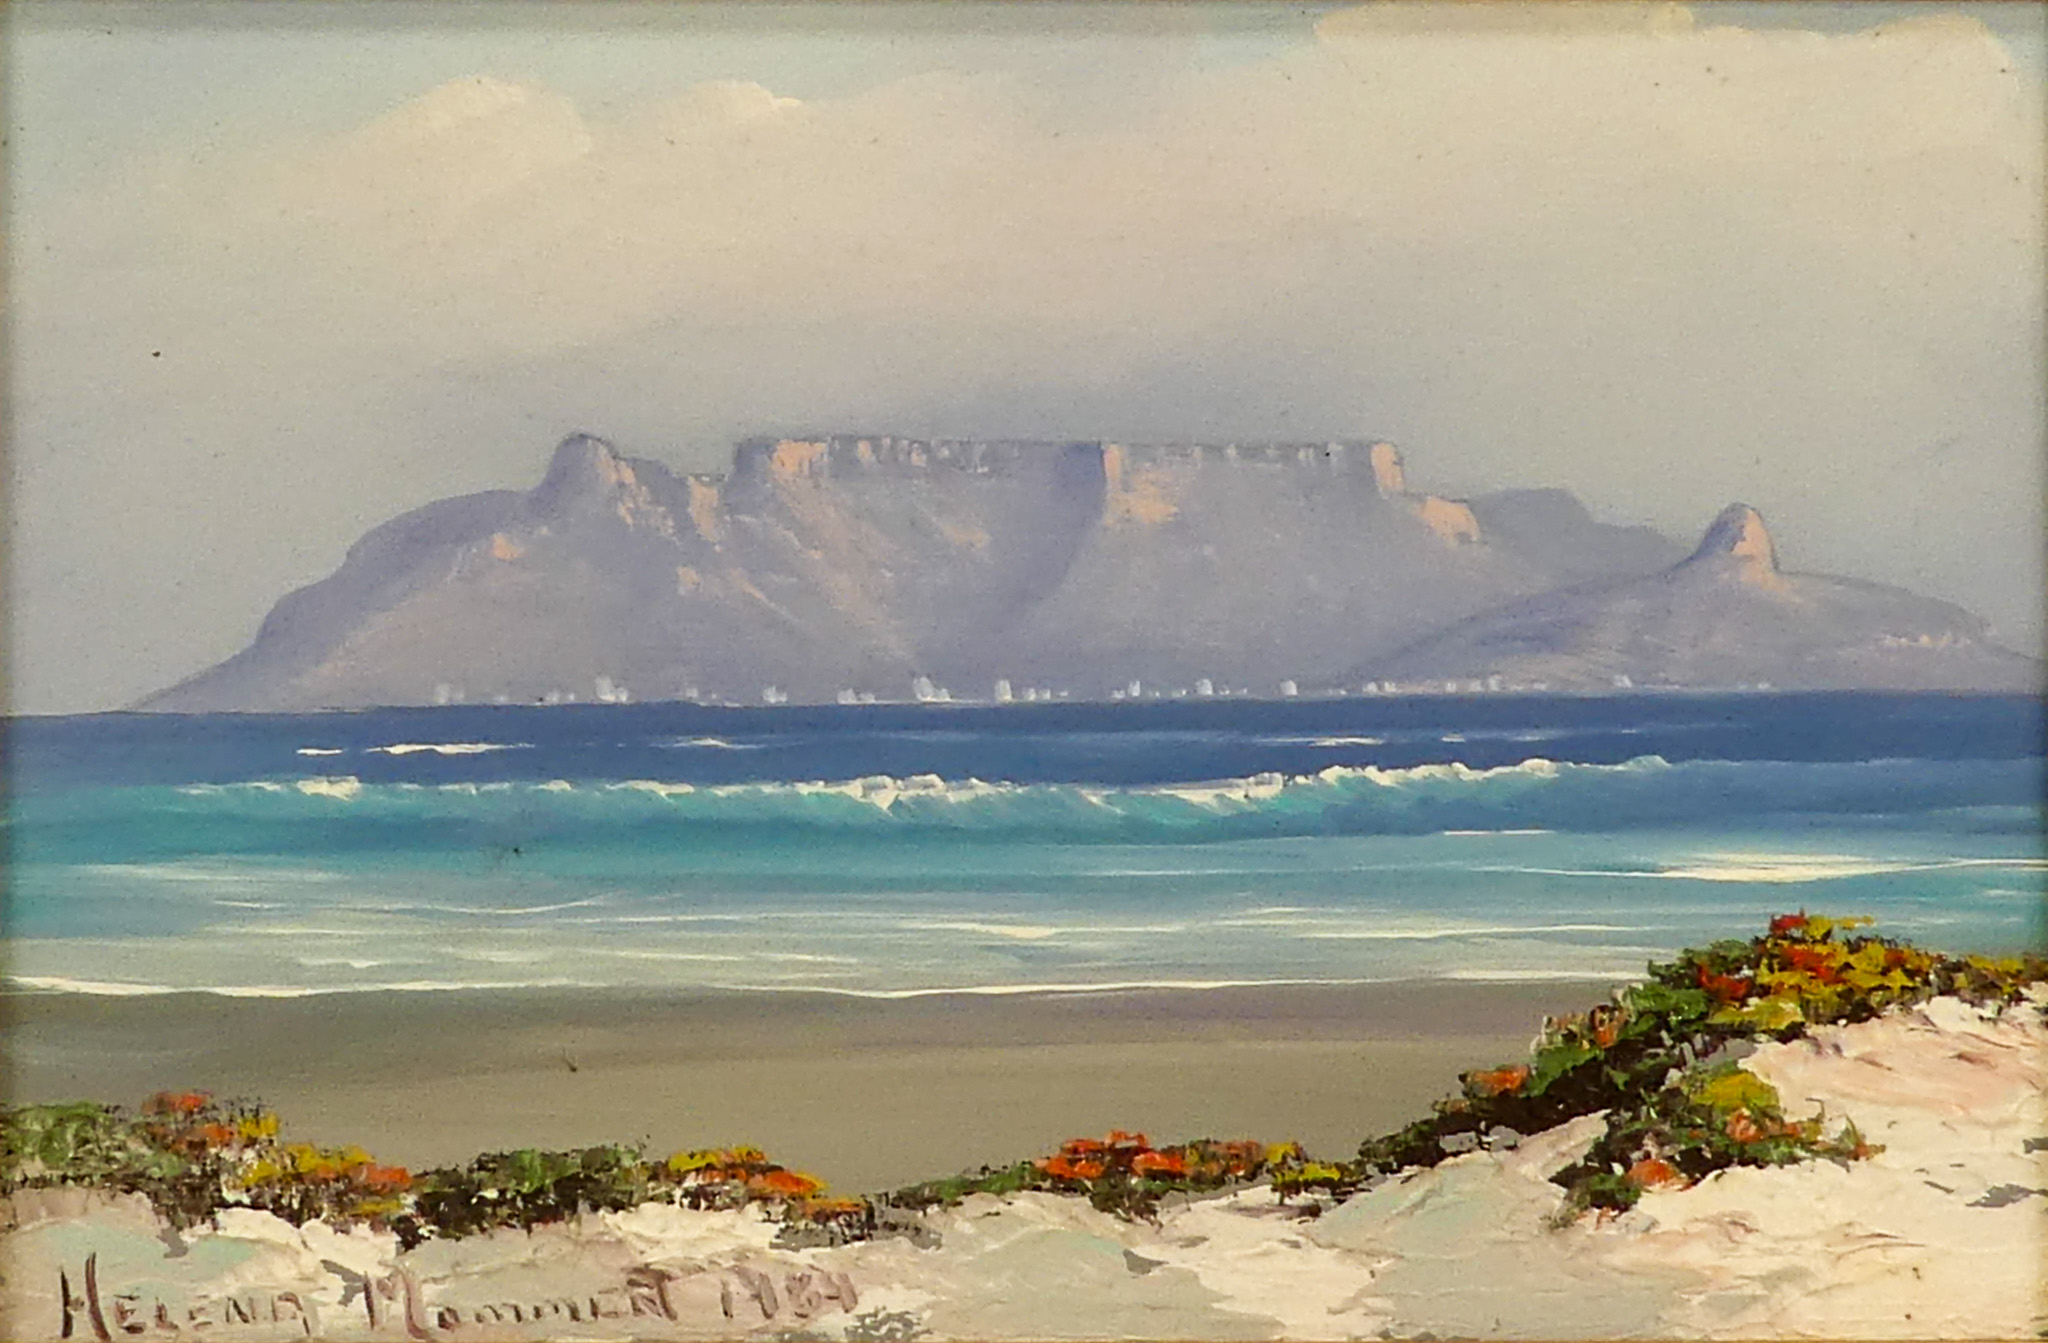 # Helena MOMMENT Table Mountain, South Africa Acrylic on board Signed and dated 1989 Framed - Image 6 of 9